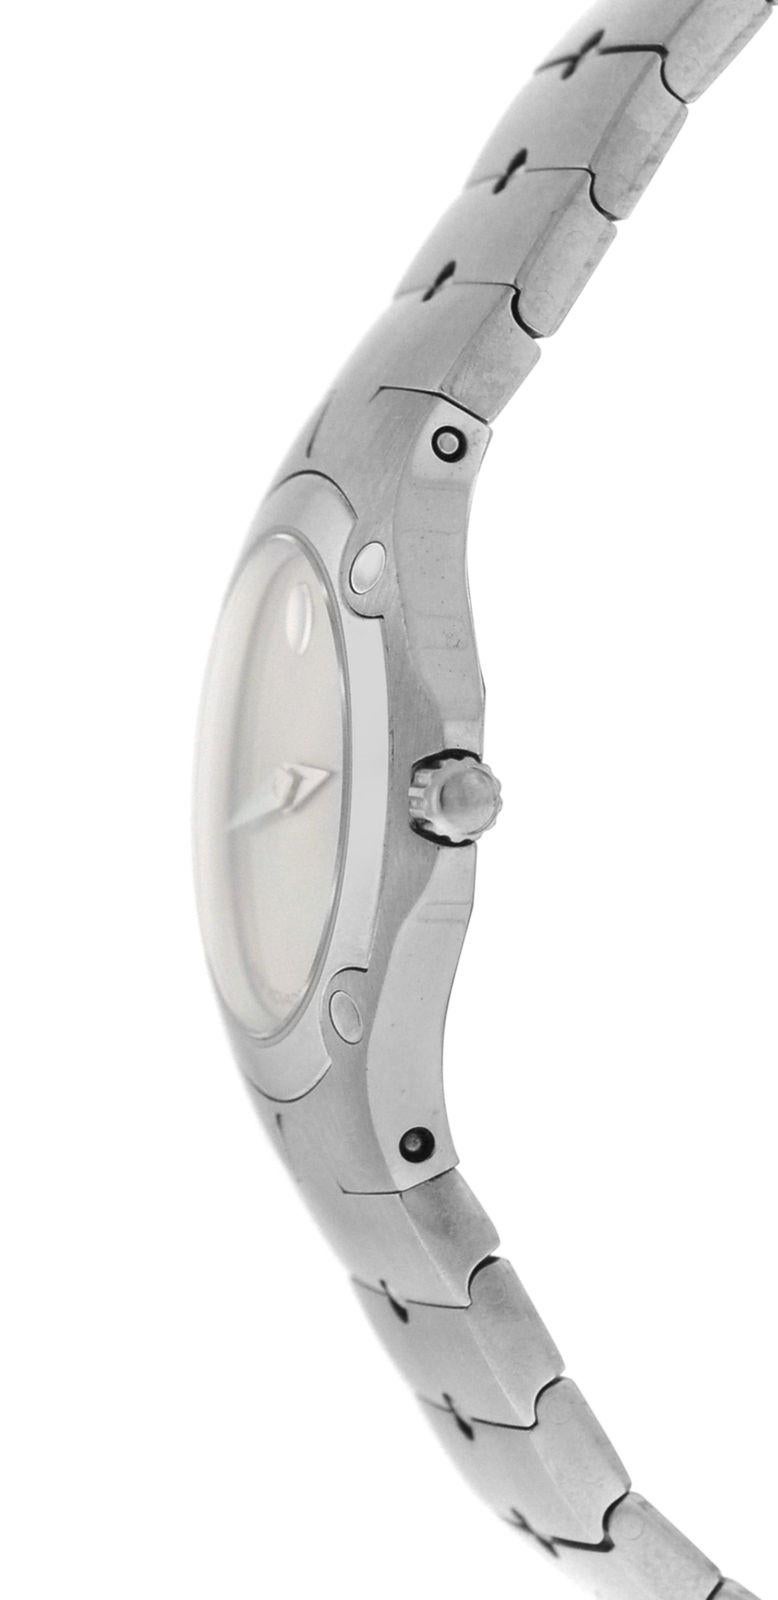 Brand	Movado
Model	Sports Edition 84.A1.1831
Gender	Ladies
Condition	Pre-owned
Movement	Swiss Quartz
Case Material	Stainless Steel
Bracelet / Strap Material	
Stainless Steel

Clasp / Buckle Material	
Stainless Steel	
Clasp Type	Butterfly